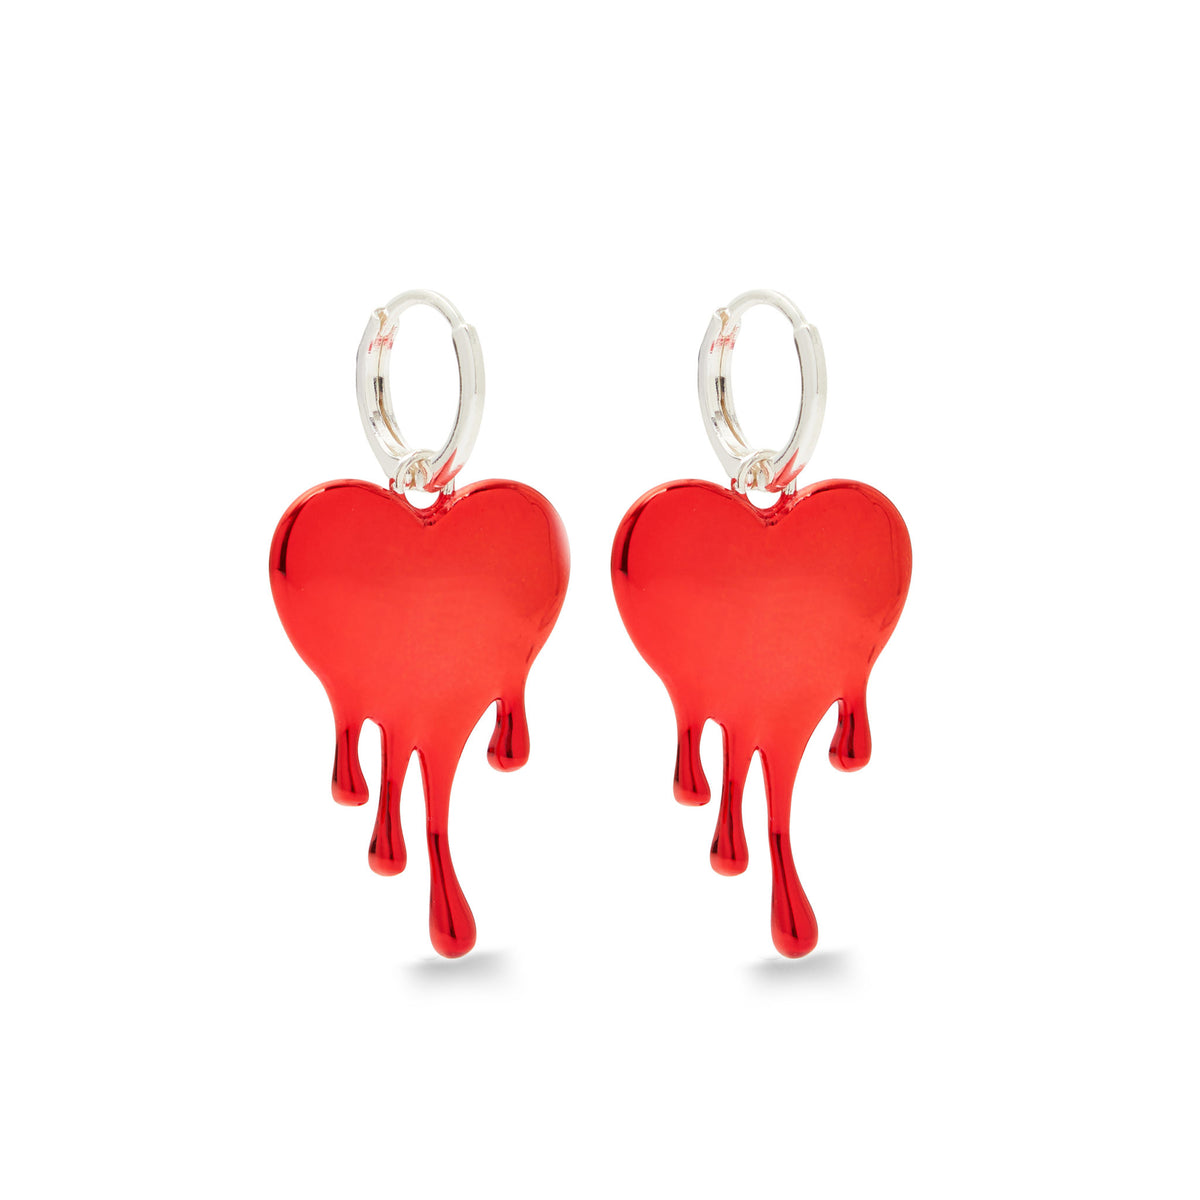 Johannah Masters - Listen to your Heart Electroplated Hoop Earrings